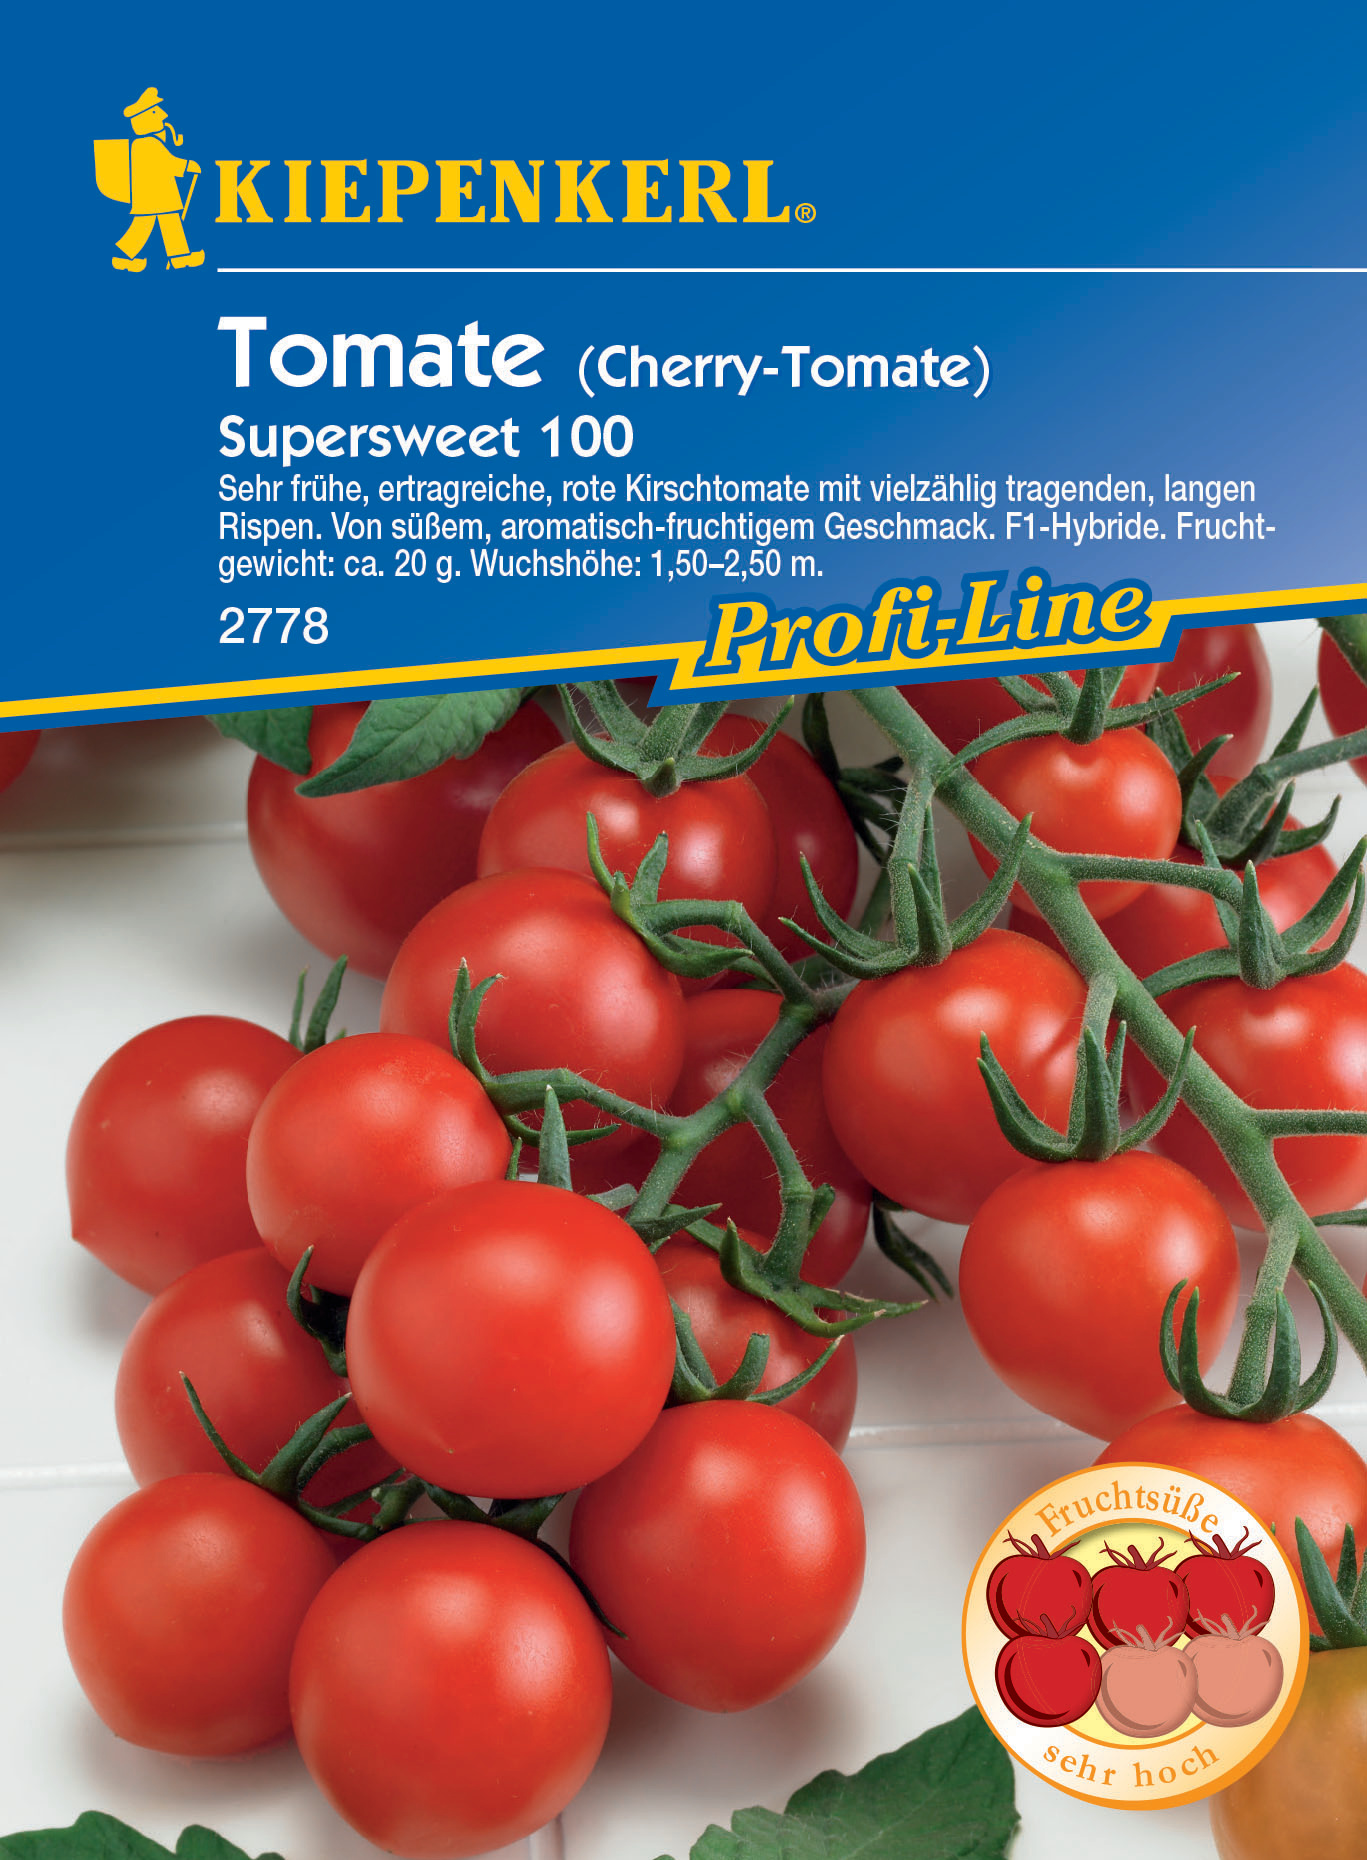 Cherry-Tomate Supersweet 100, F1